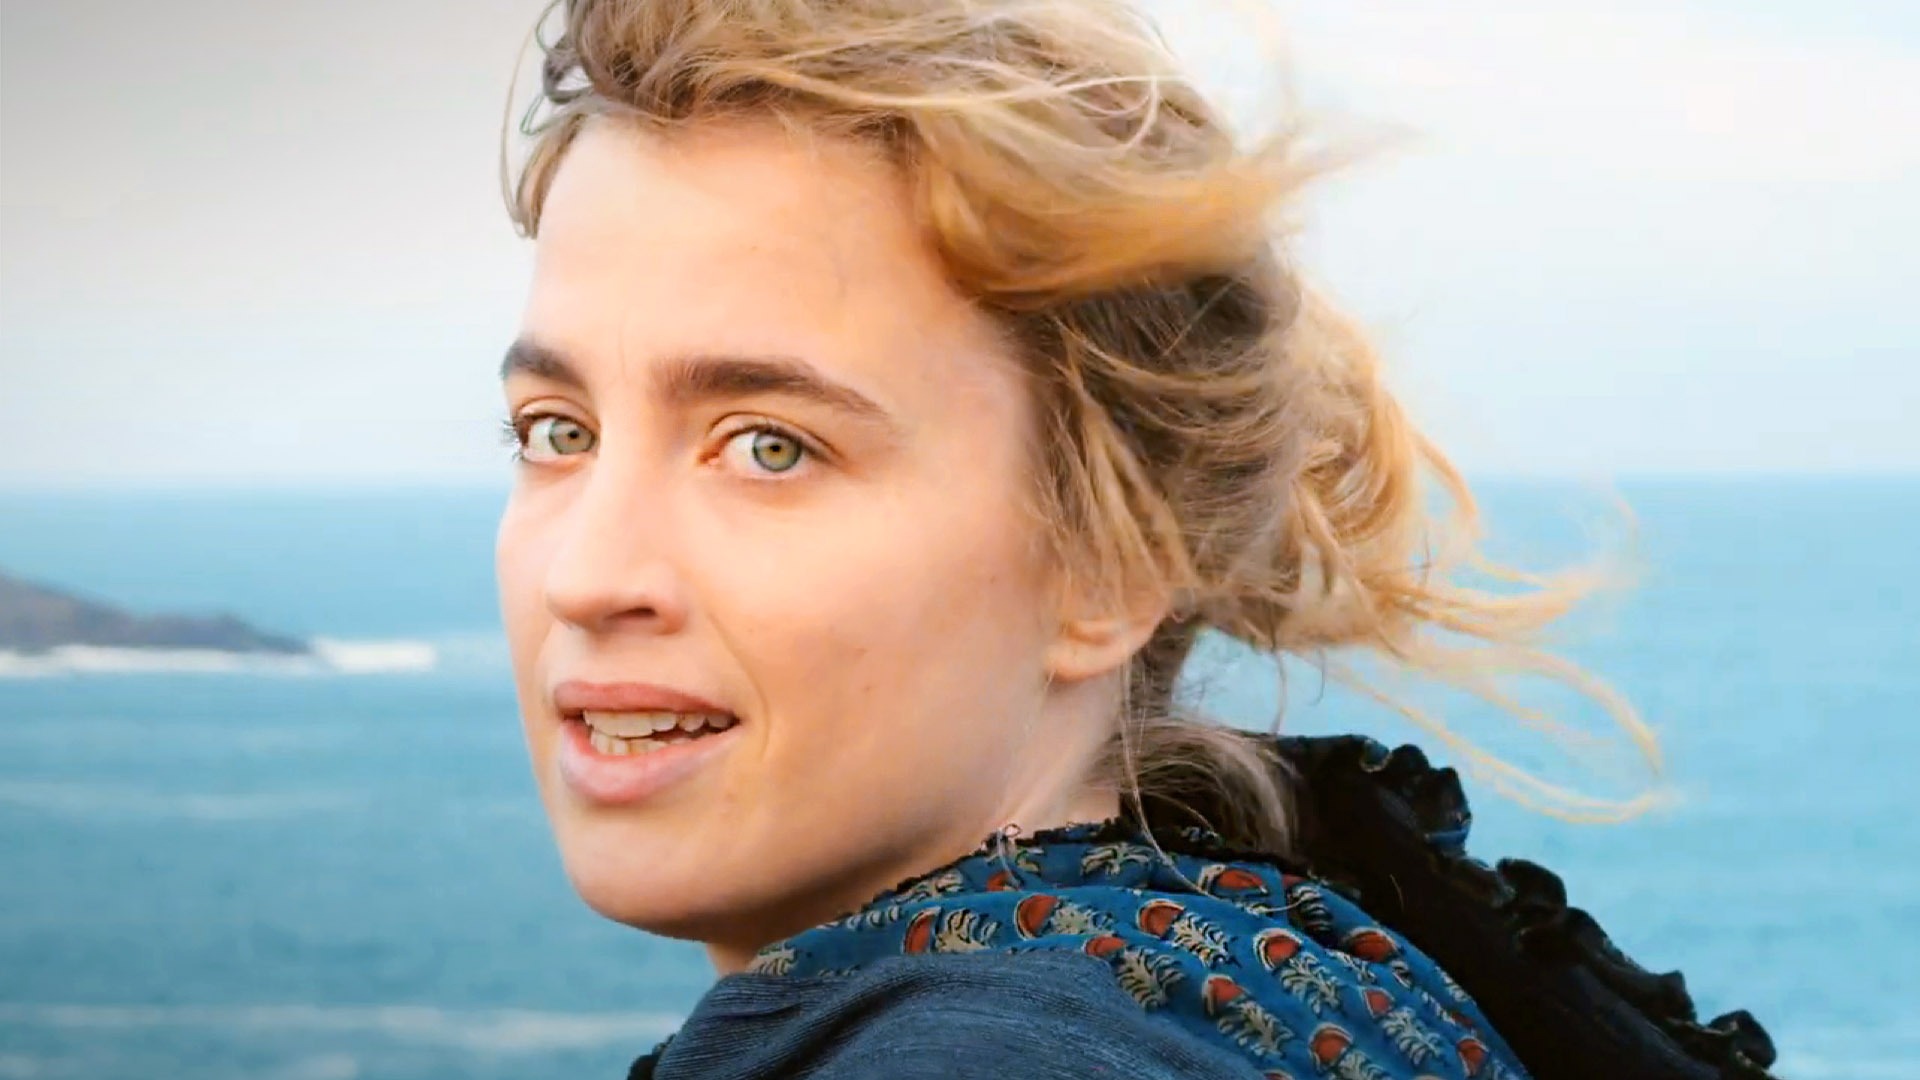 Portrait of a Lady on Fire Restored My Faith in Love Stories, Queer film  review, French films, Noemie Merlant, Adele Haenel, Celine Sciamma